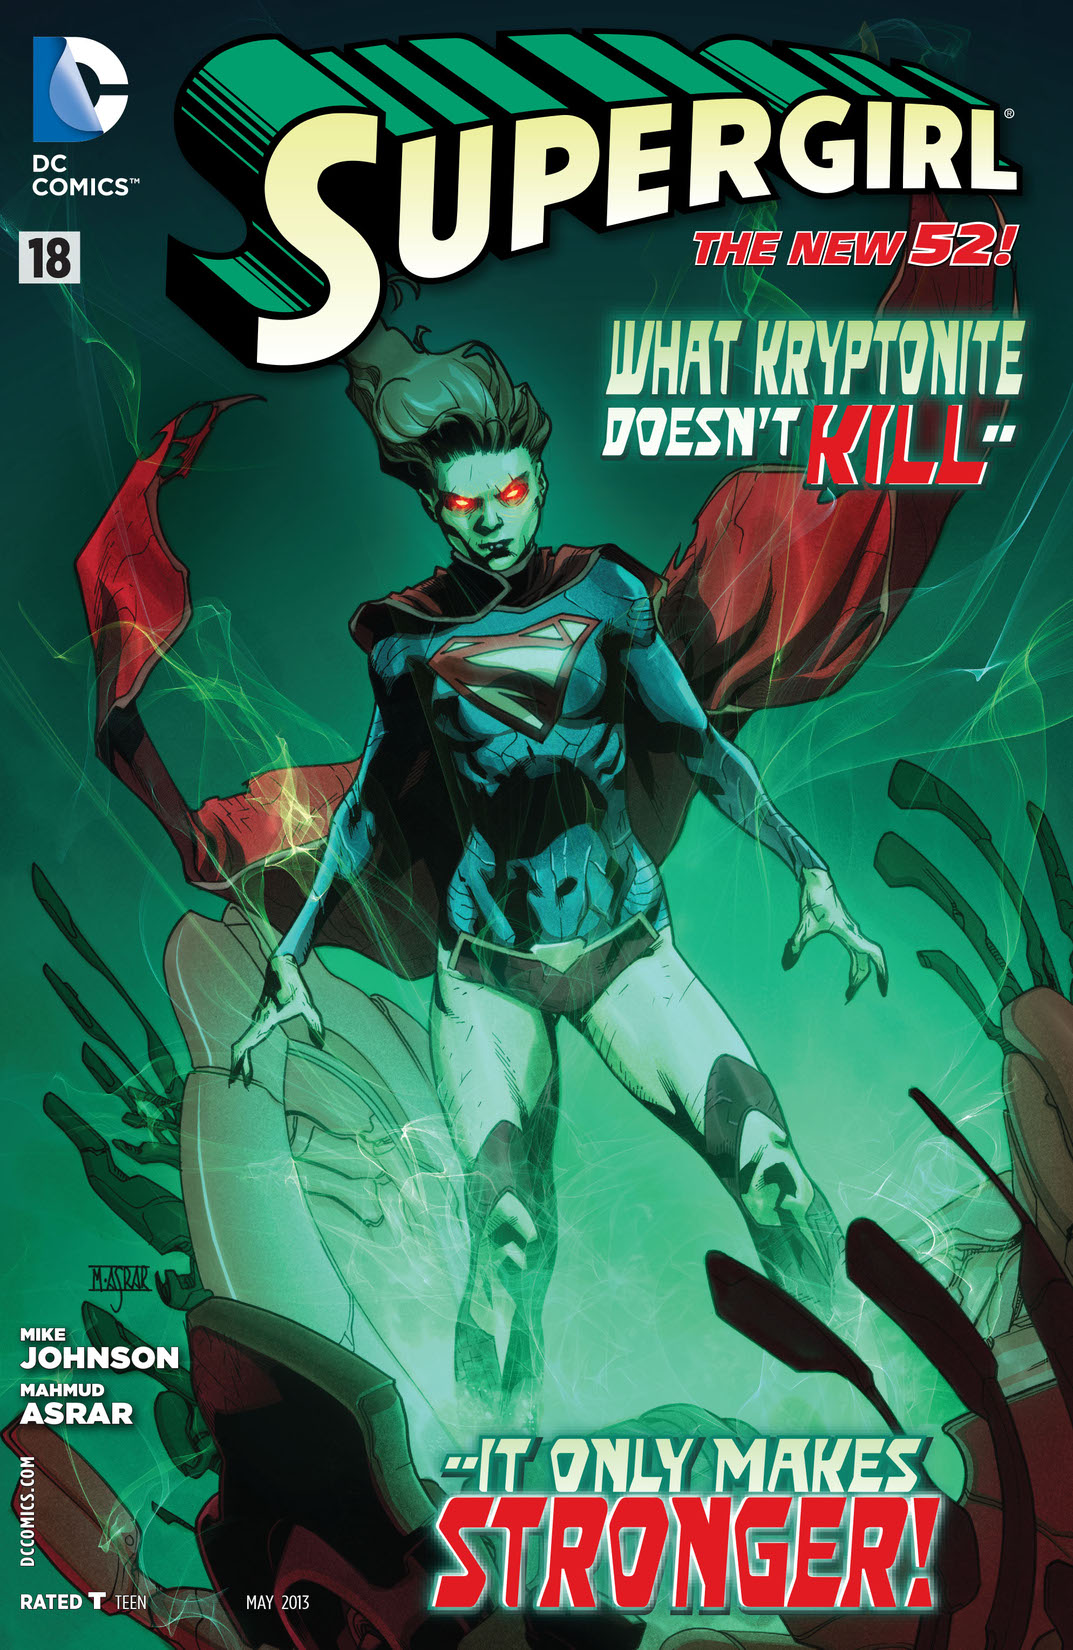 Supergirl (2011-) #18 preview images